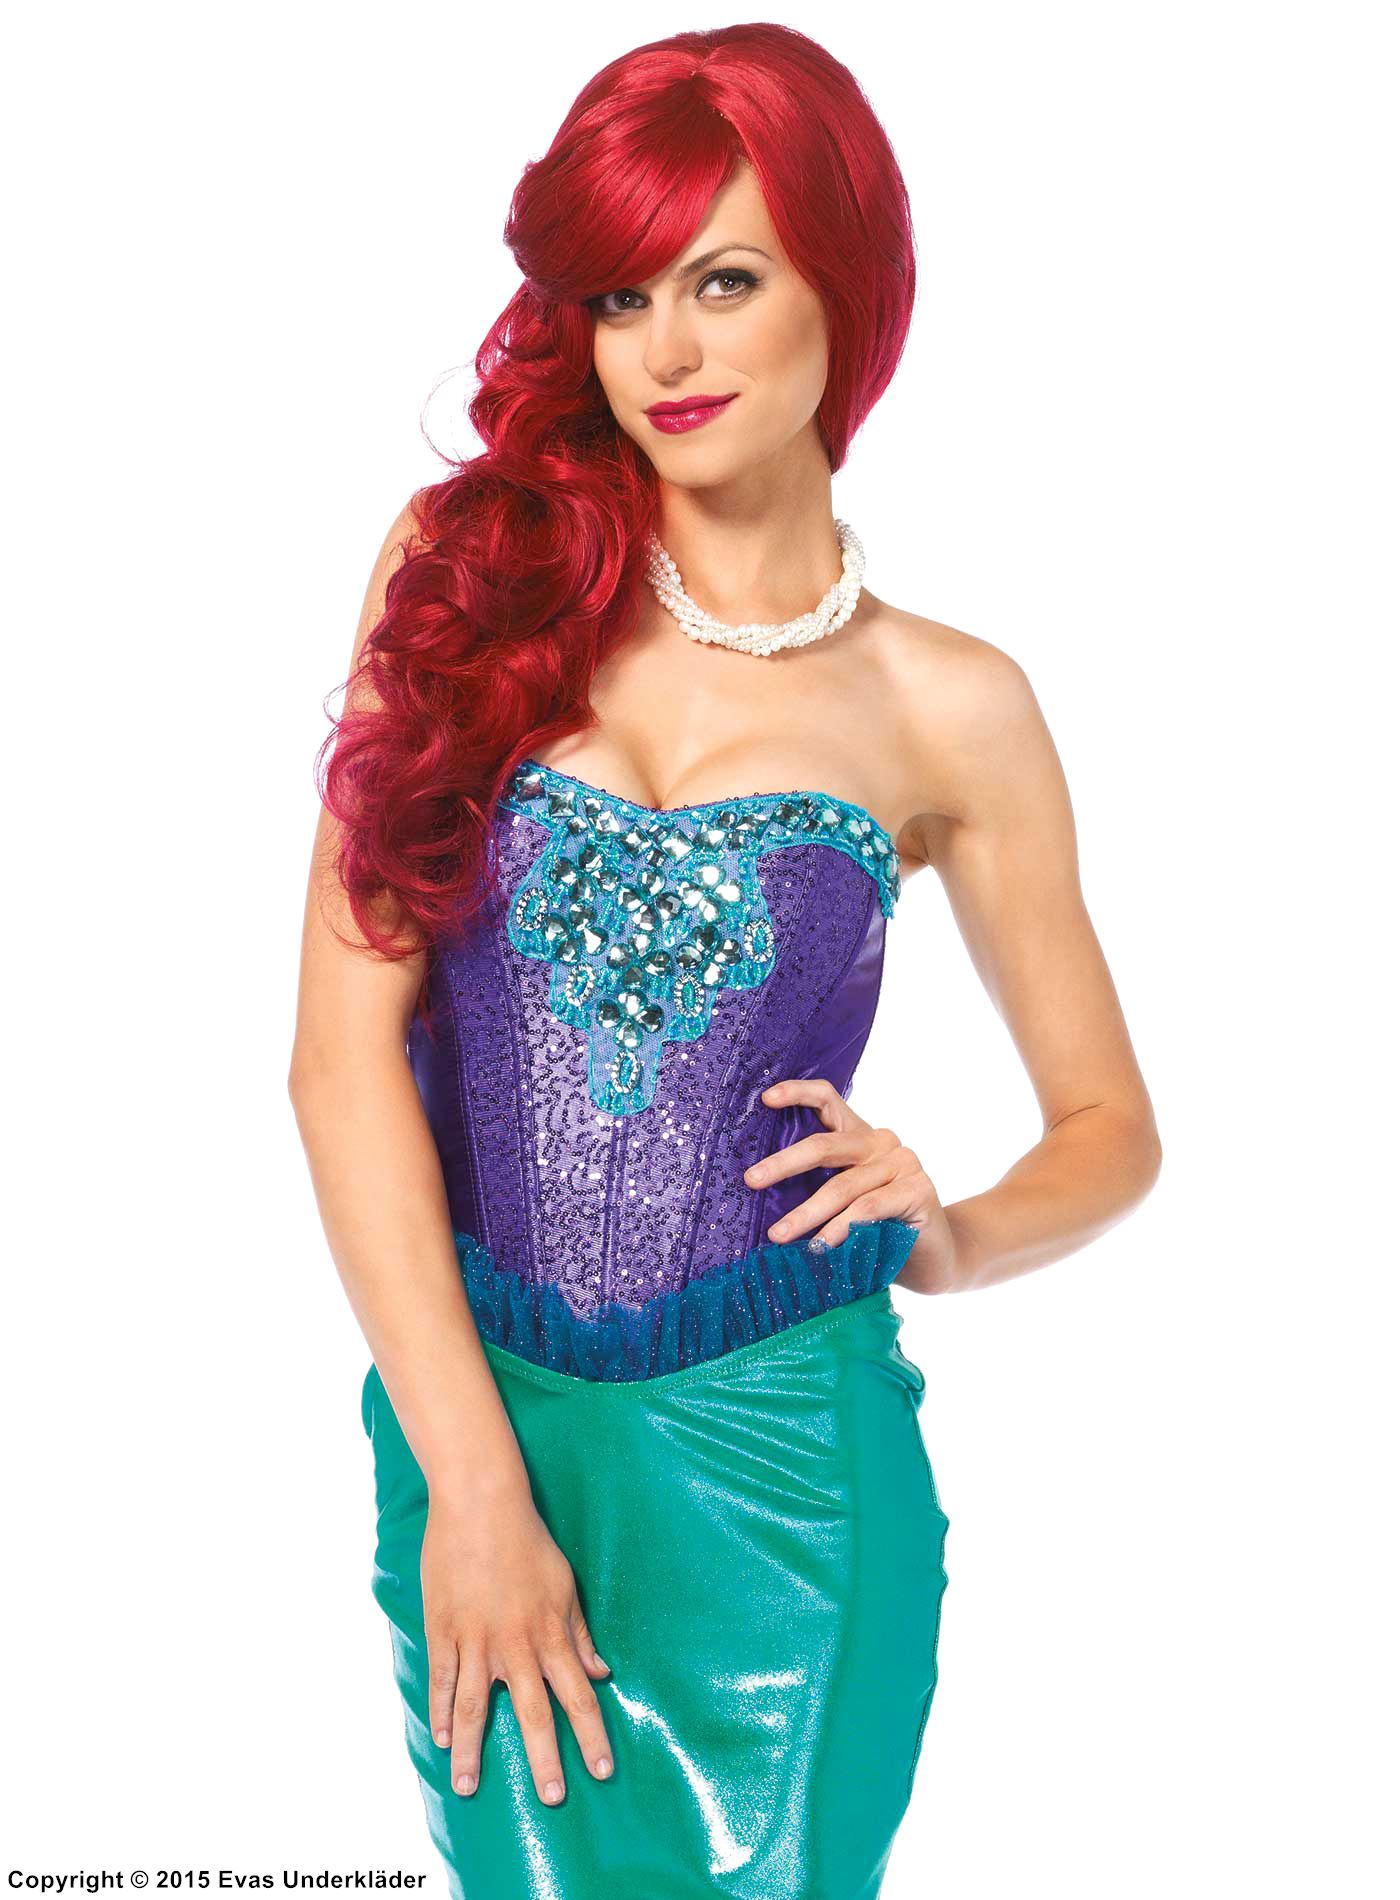 Ariel from The Little Mermaid, top and skirt costume, rhinestones, ruffles, sequins, fin